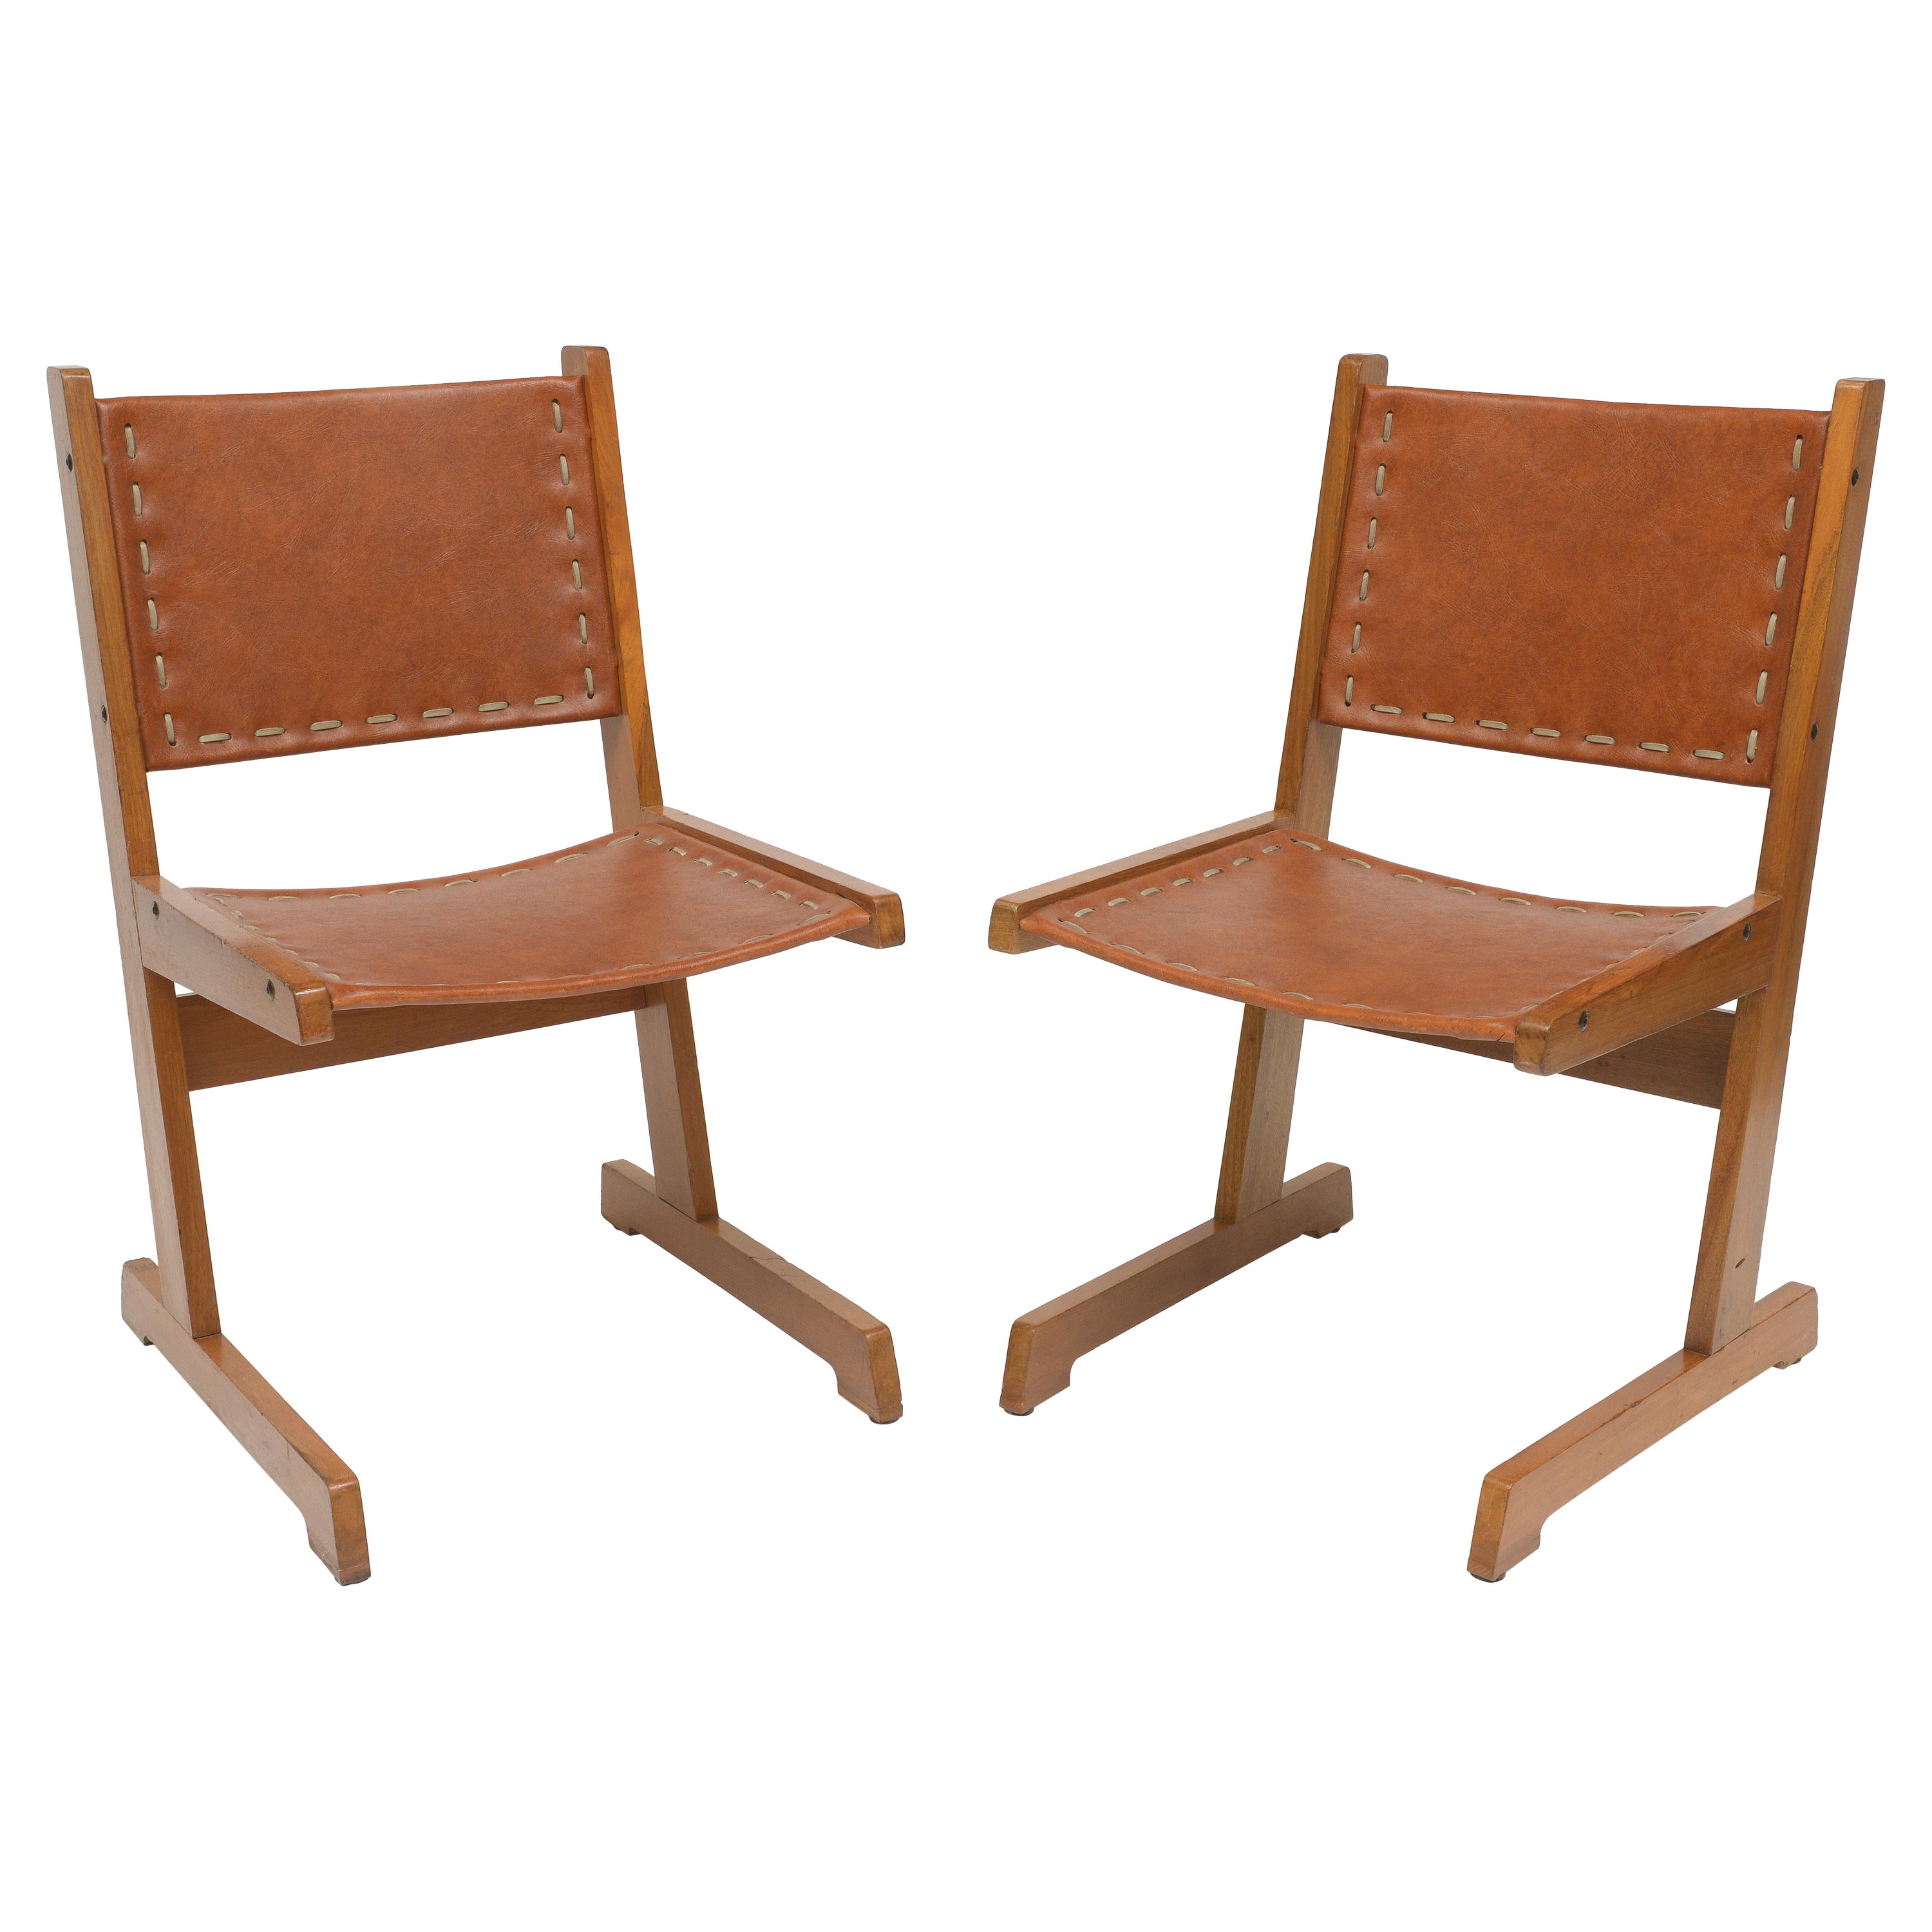 A Pair of Cantilevered Mid-Century Colombian Leather Sling Chairs 